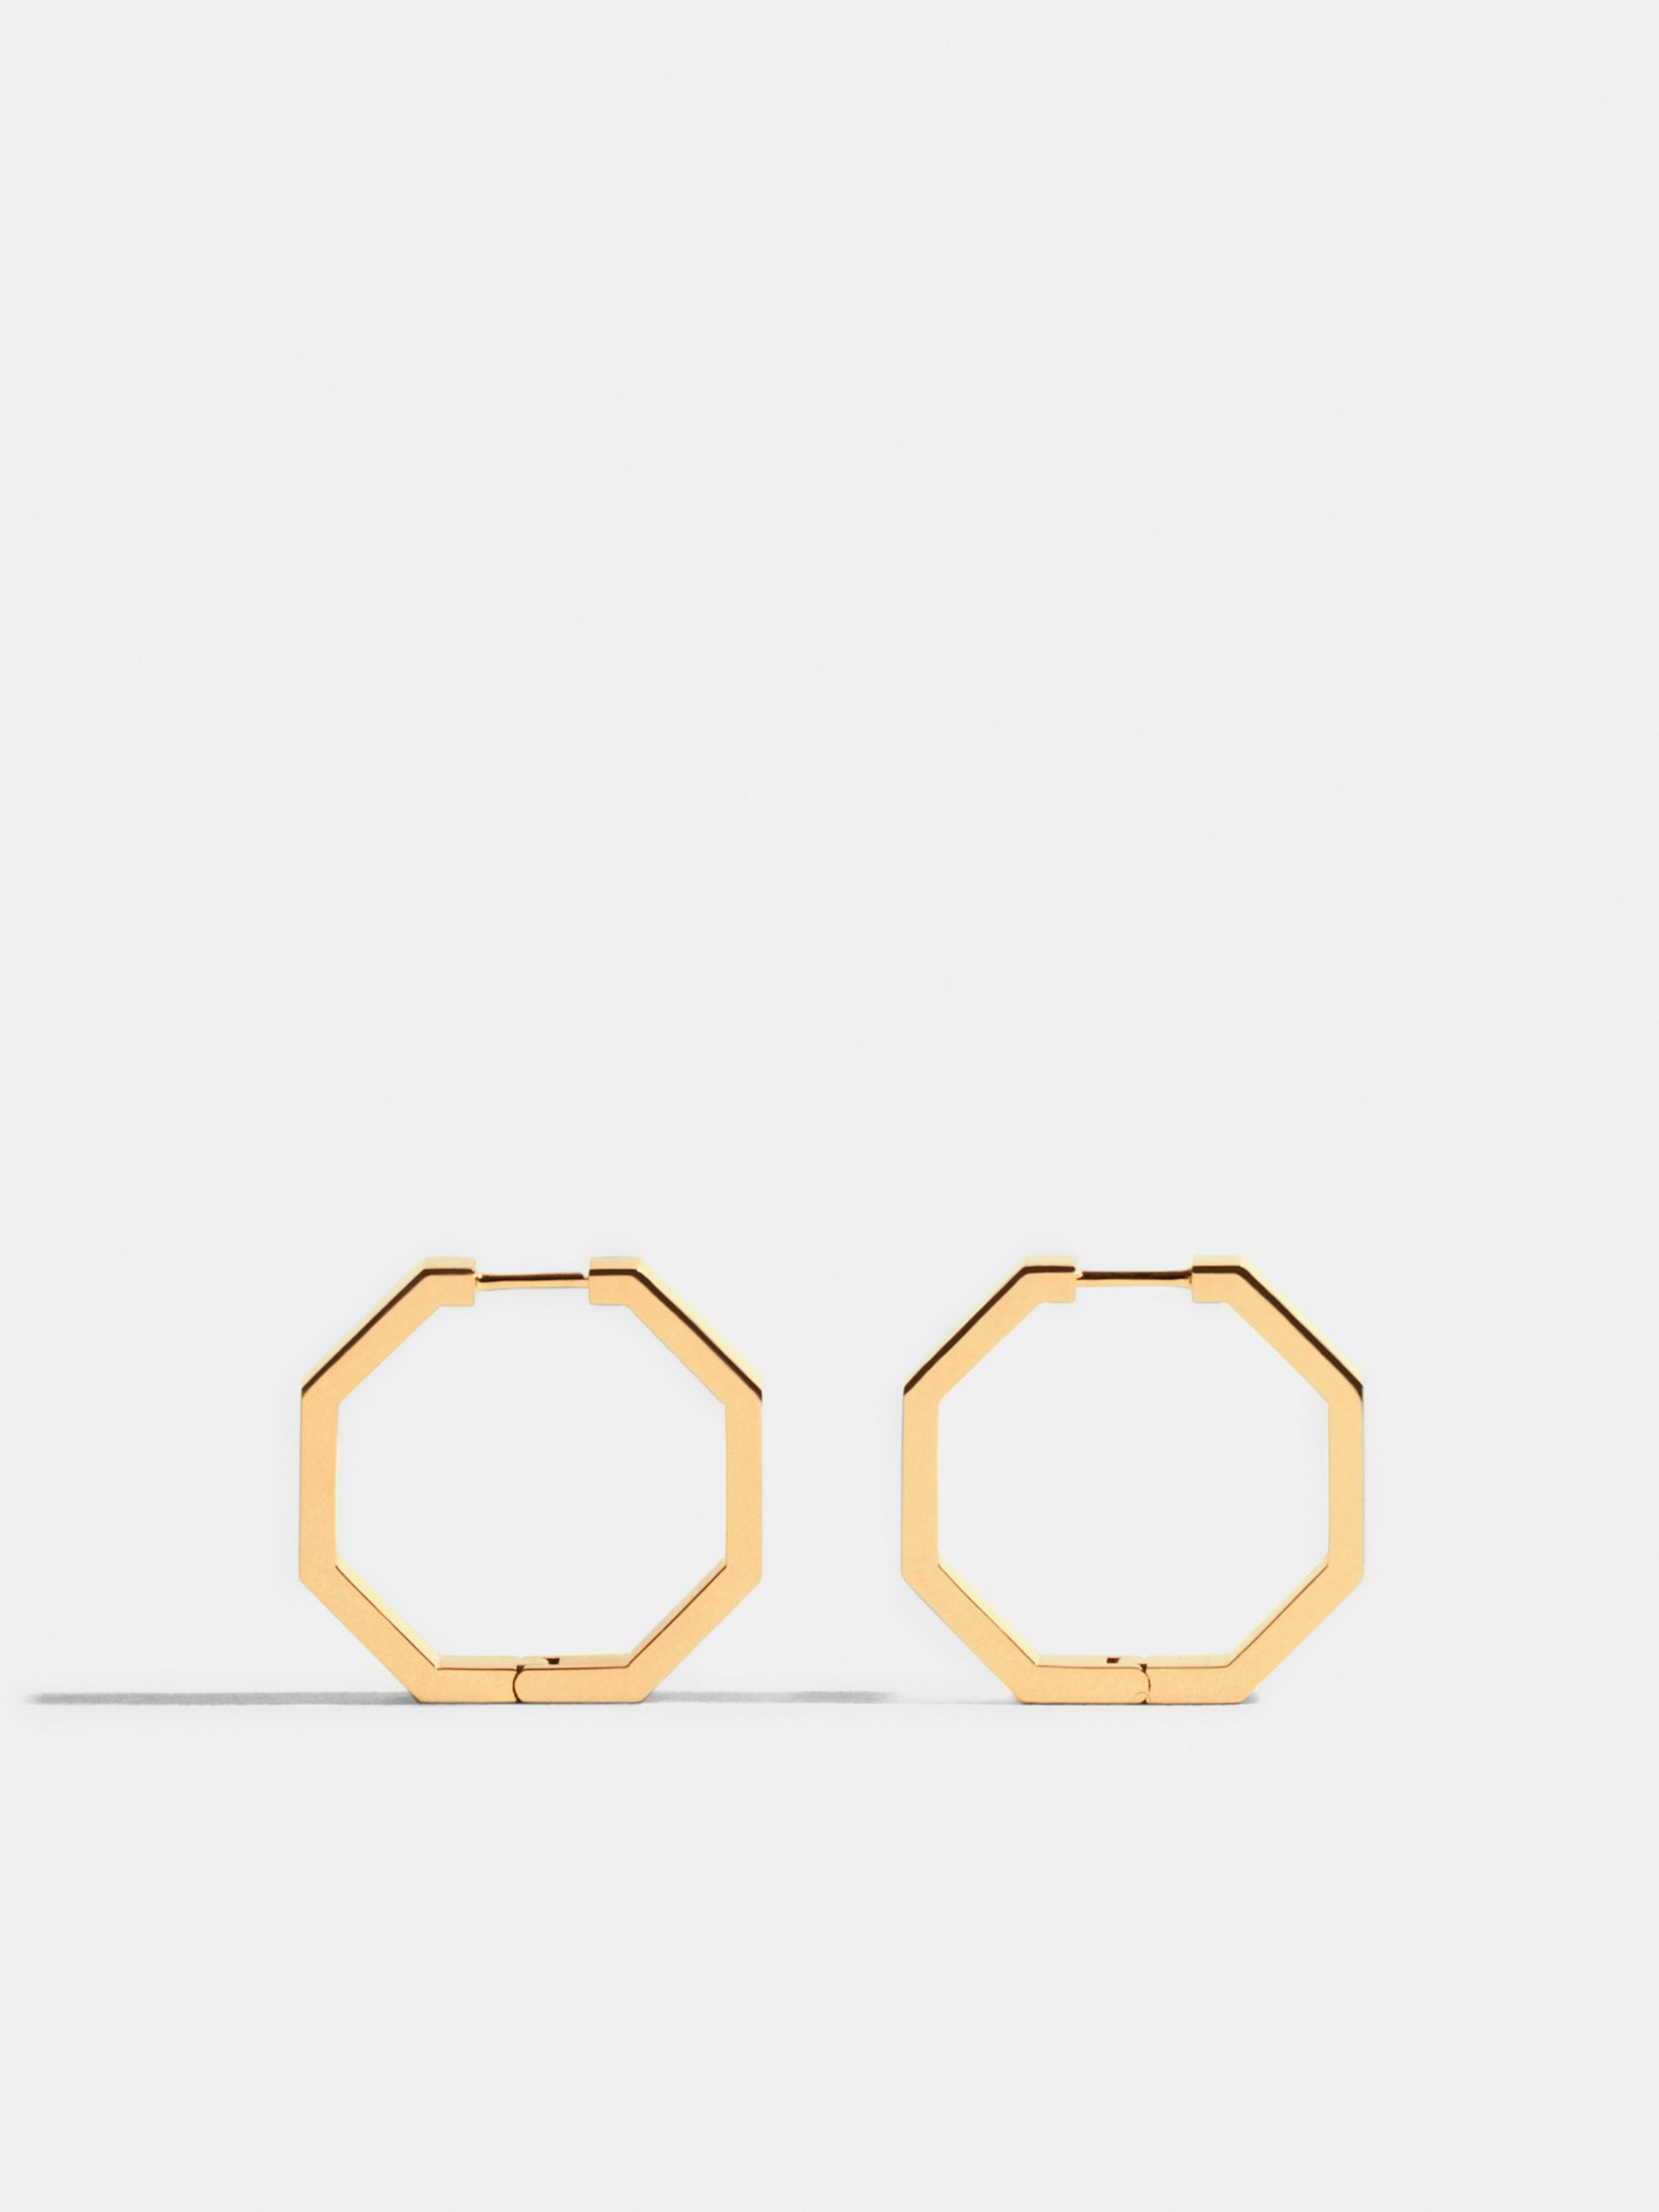 Octogone 18mm earrings in 18k Fairmined ethical yellow gold, the pair.